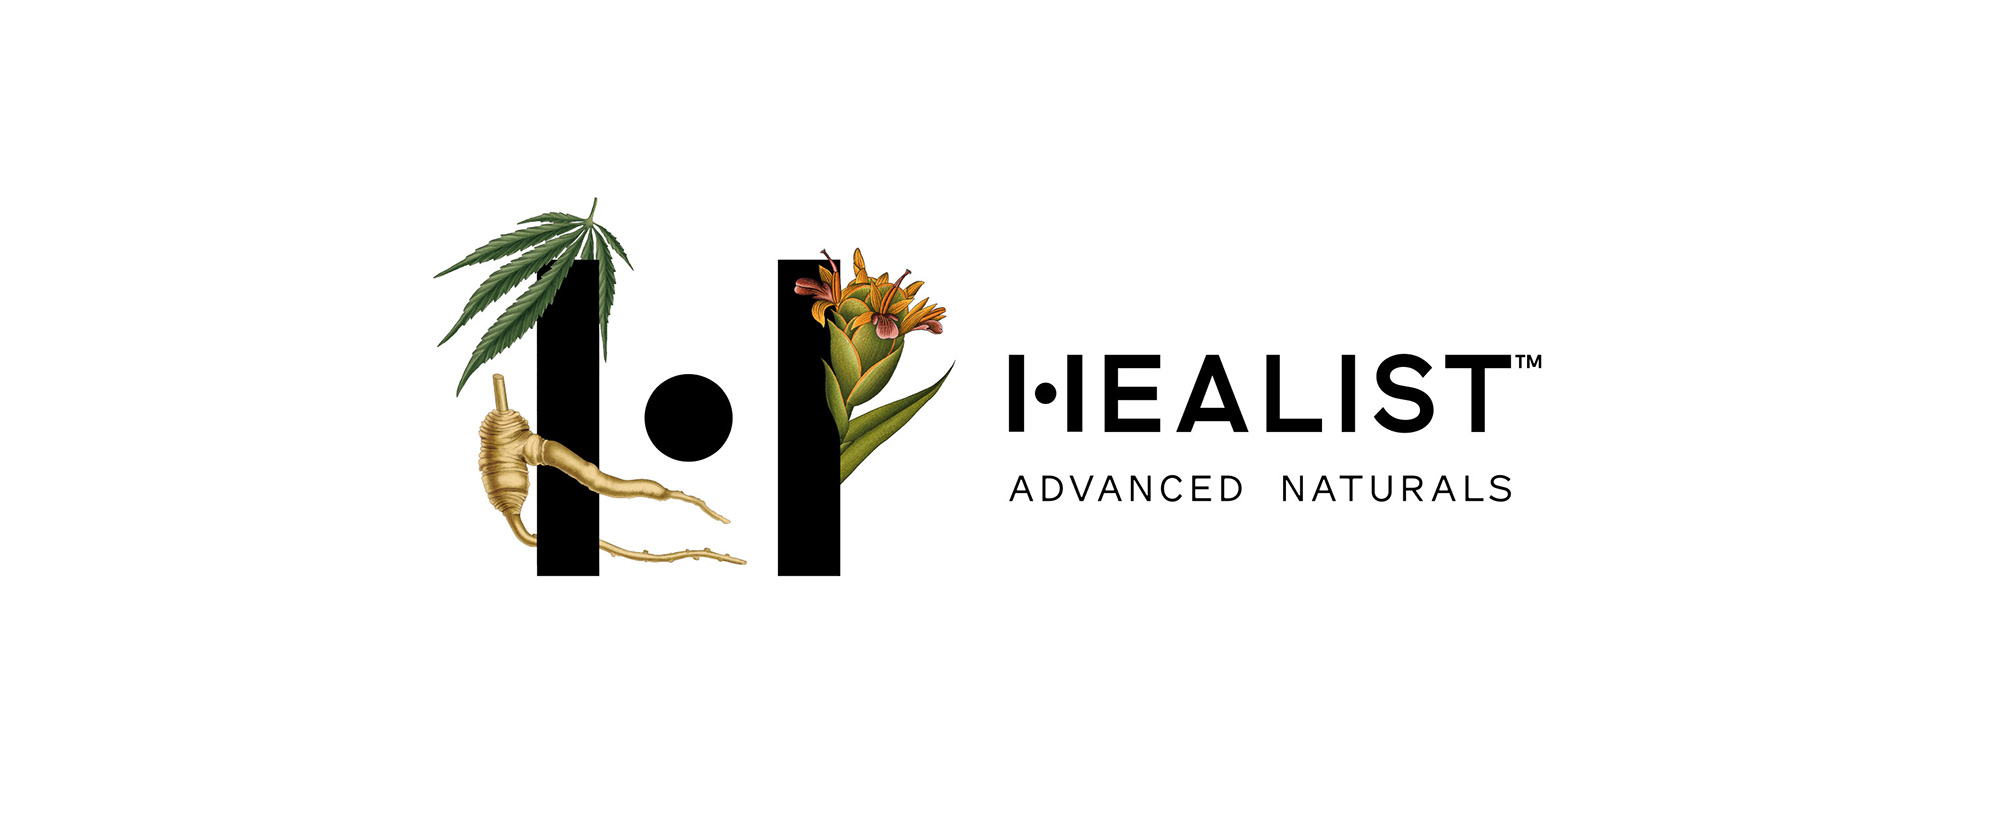 New Logo, Identity, and Packaging for Healist Naturals by Robot Food